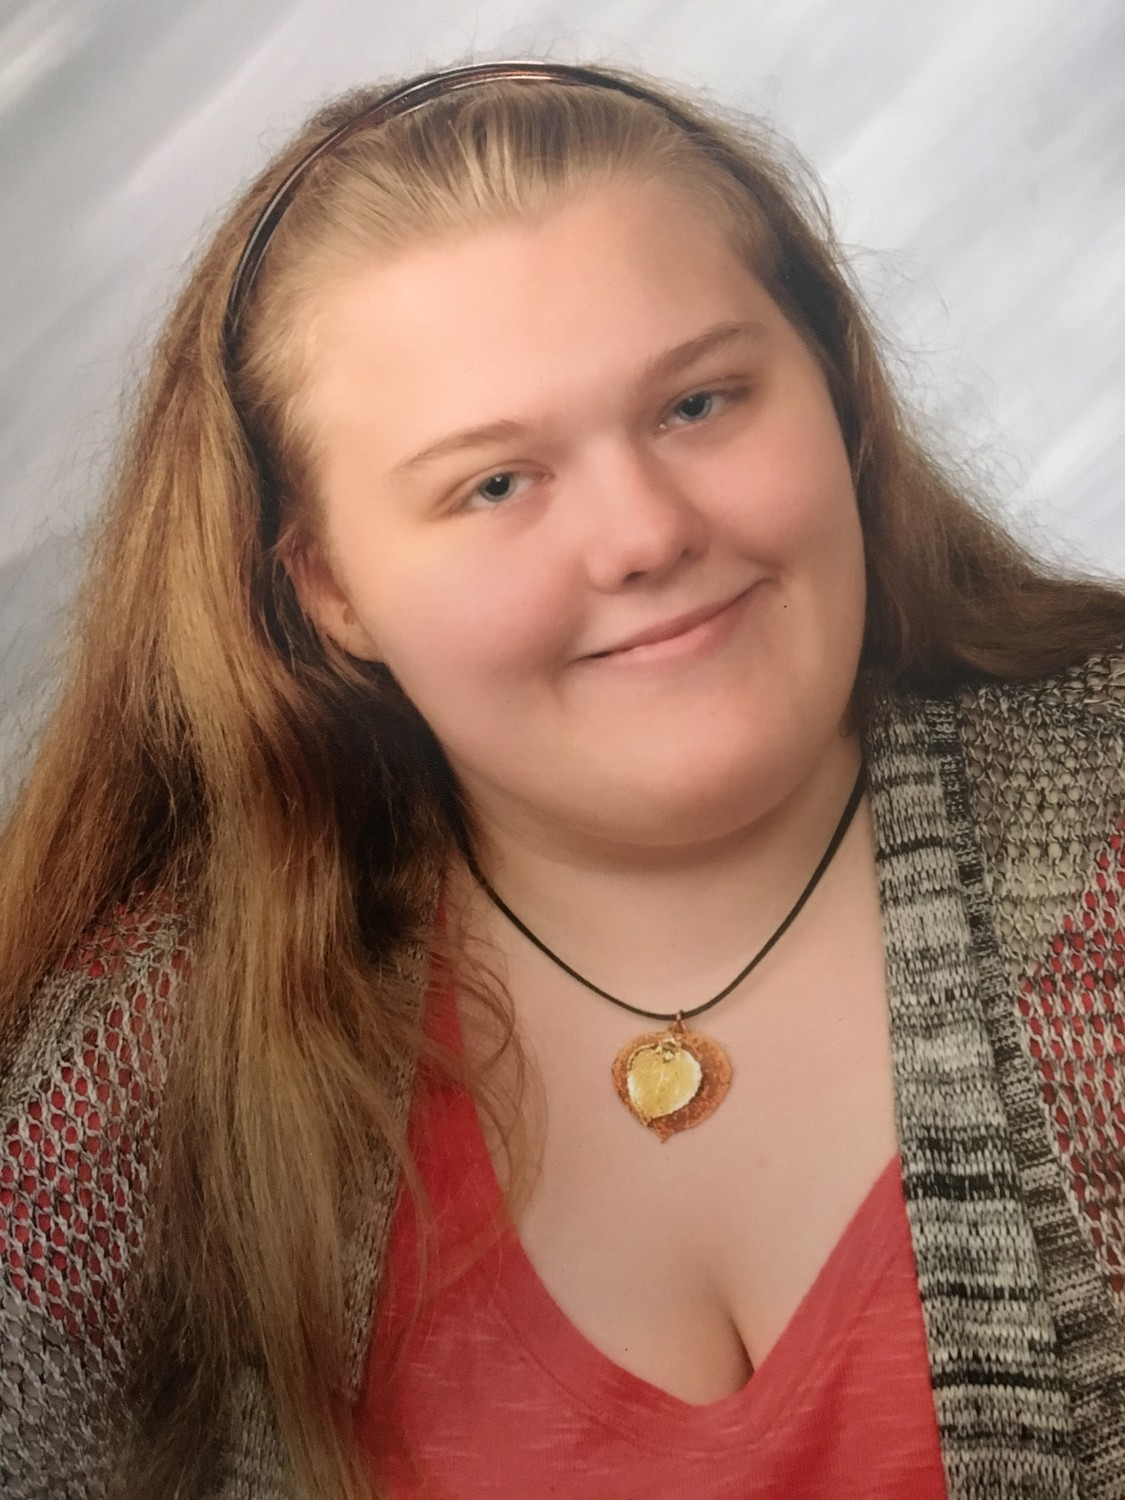 MEMORIAL SCHOLARSHIP: The late Carson, who was a highly-popular JHS student-musician, lost her courageous battle with Leukemia back on Jan. 18, 2018, and since her unfortunate passing students and adults alike remember her as a lover of life, music and wildlife.